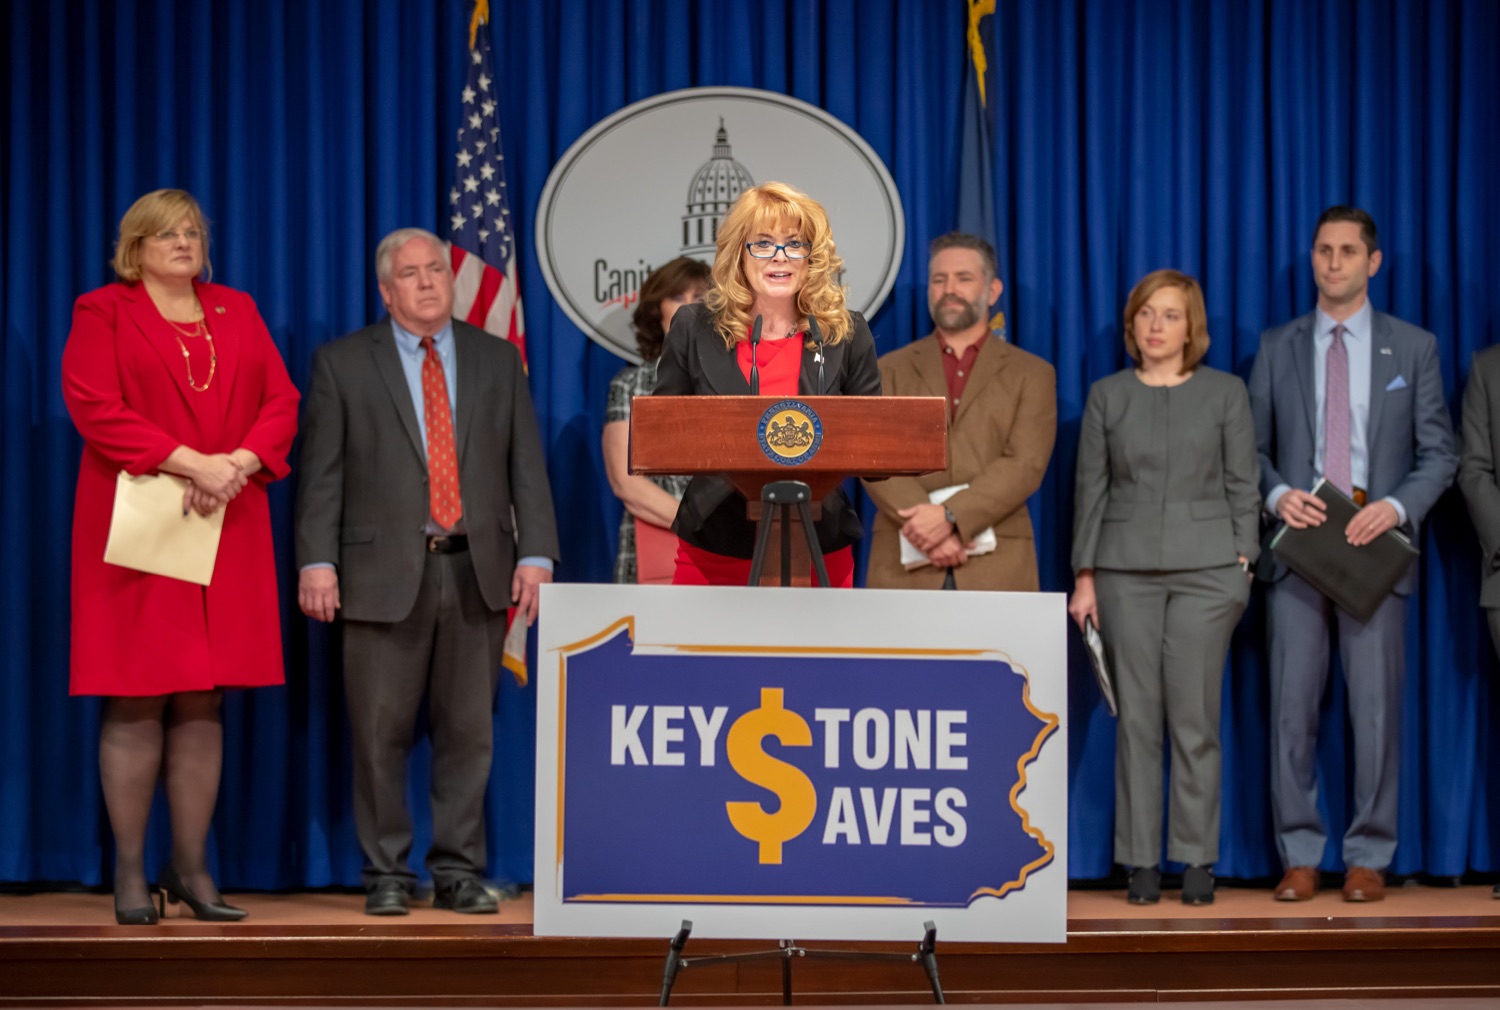 Treasurer Stacy Garrity, Rep. Tracy Pennycuick and Rep. Michael Driscoll announced the upcoming introduction of a bill to create Keystone Saves, a retirement savings program for hardworking Pennsylvanians who do not have access to retirement savings through their employer.  They were joined at the announcement by supporters in the General Assembly and representatives of AARP, the United Way of Pennsylvania, the Pennsylvania Health Care Association, and the Pennsylvania Association of Sustainable Agriculture. Other supporters of Keystone Saves include The Pew Charitable Trusts and the Pennsylvania Institute of CPAs. Harrisburg, PA - December 12, 2021<br><a href="https://filesource.amperwave.net/commonwealthofpa/photo/20293_TREAS_KeystoneSaves_AG_01.jpg" target="_blank">⇣ Download Photo</a>